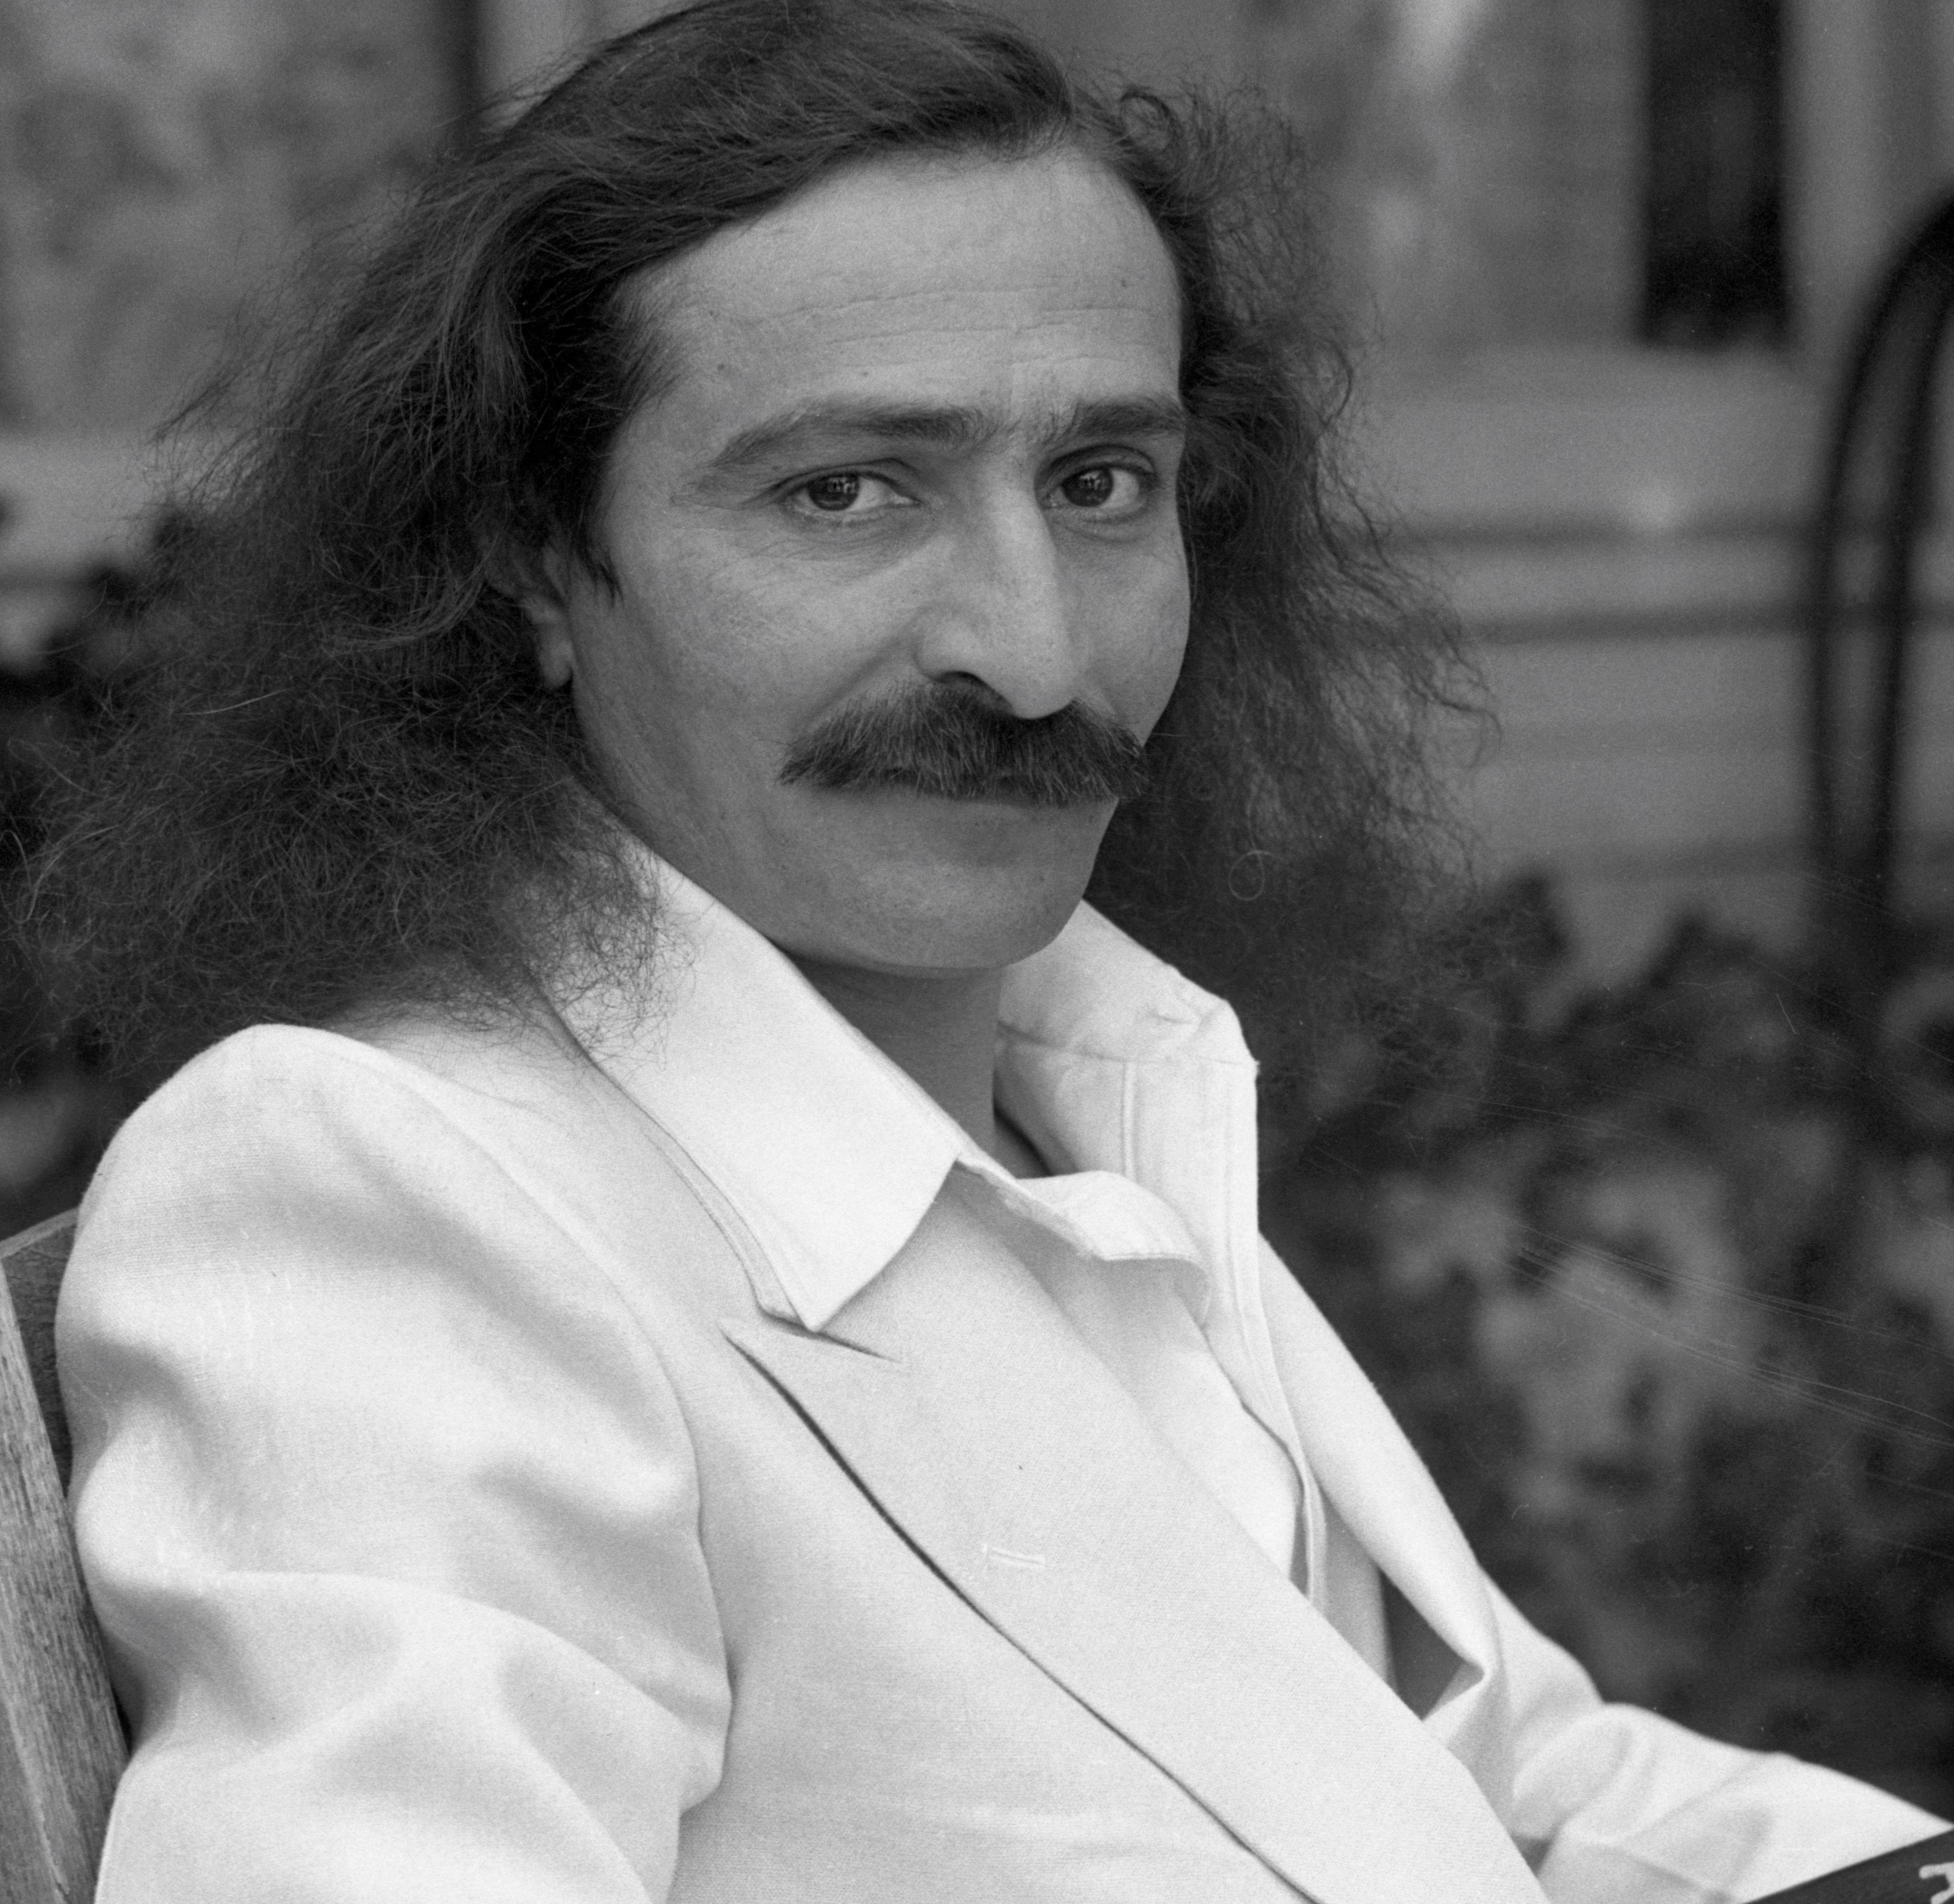 Meher Baba wearing a suit